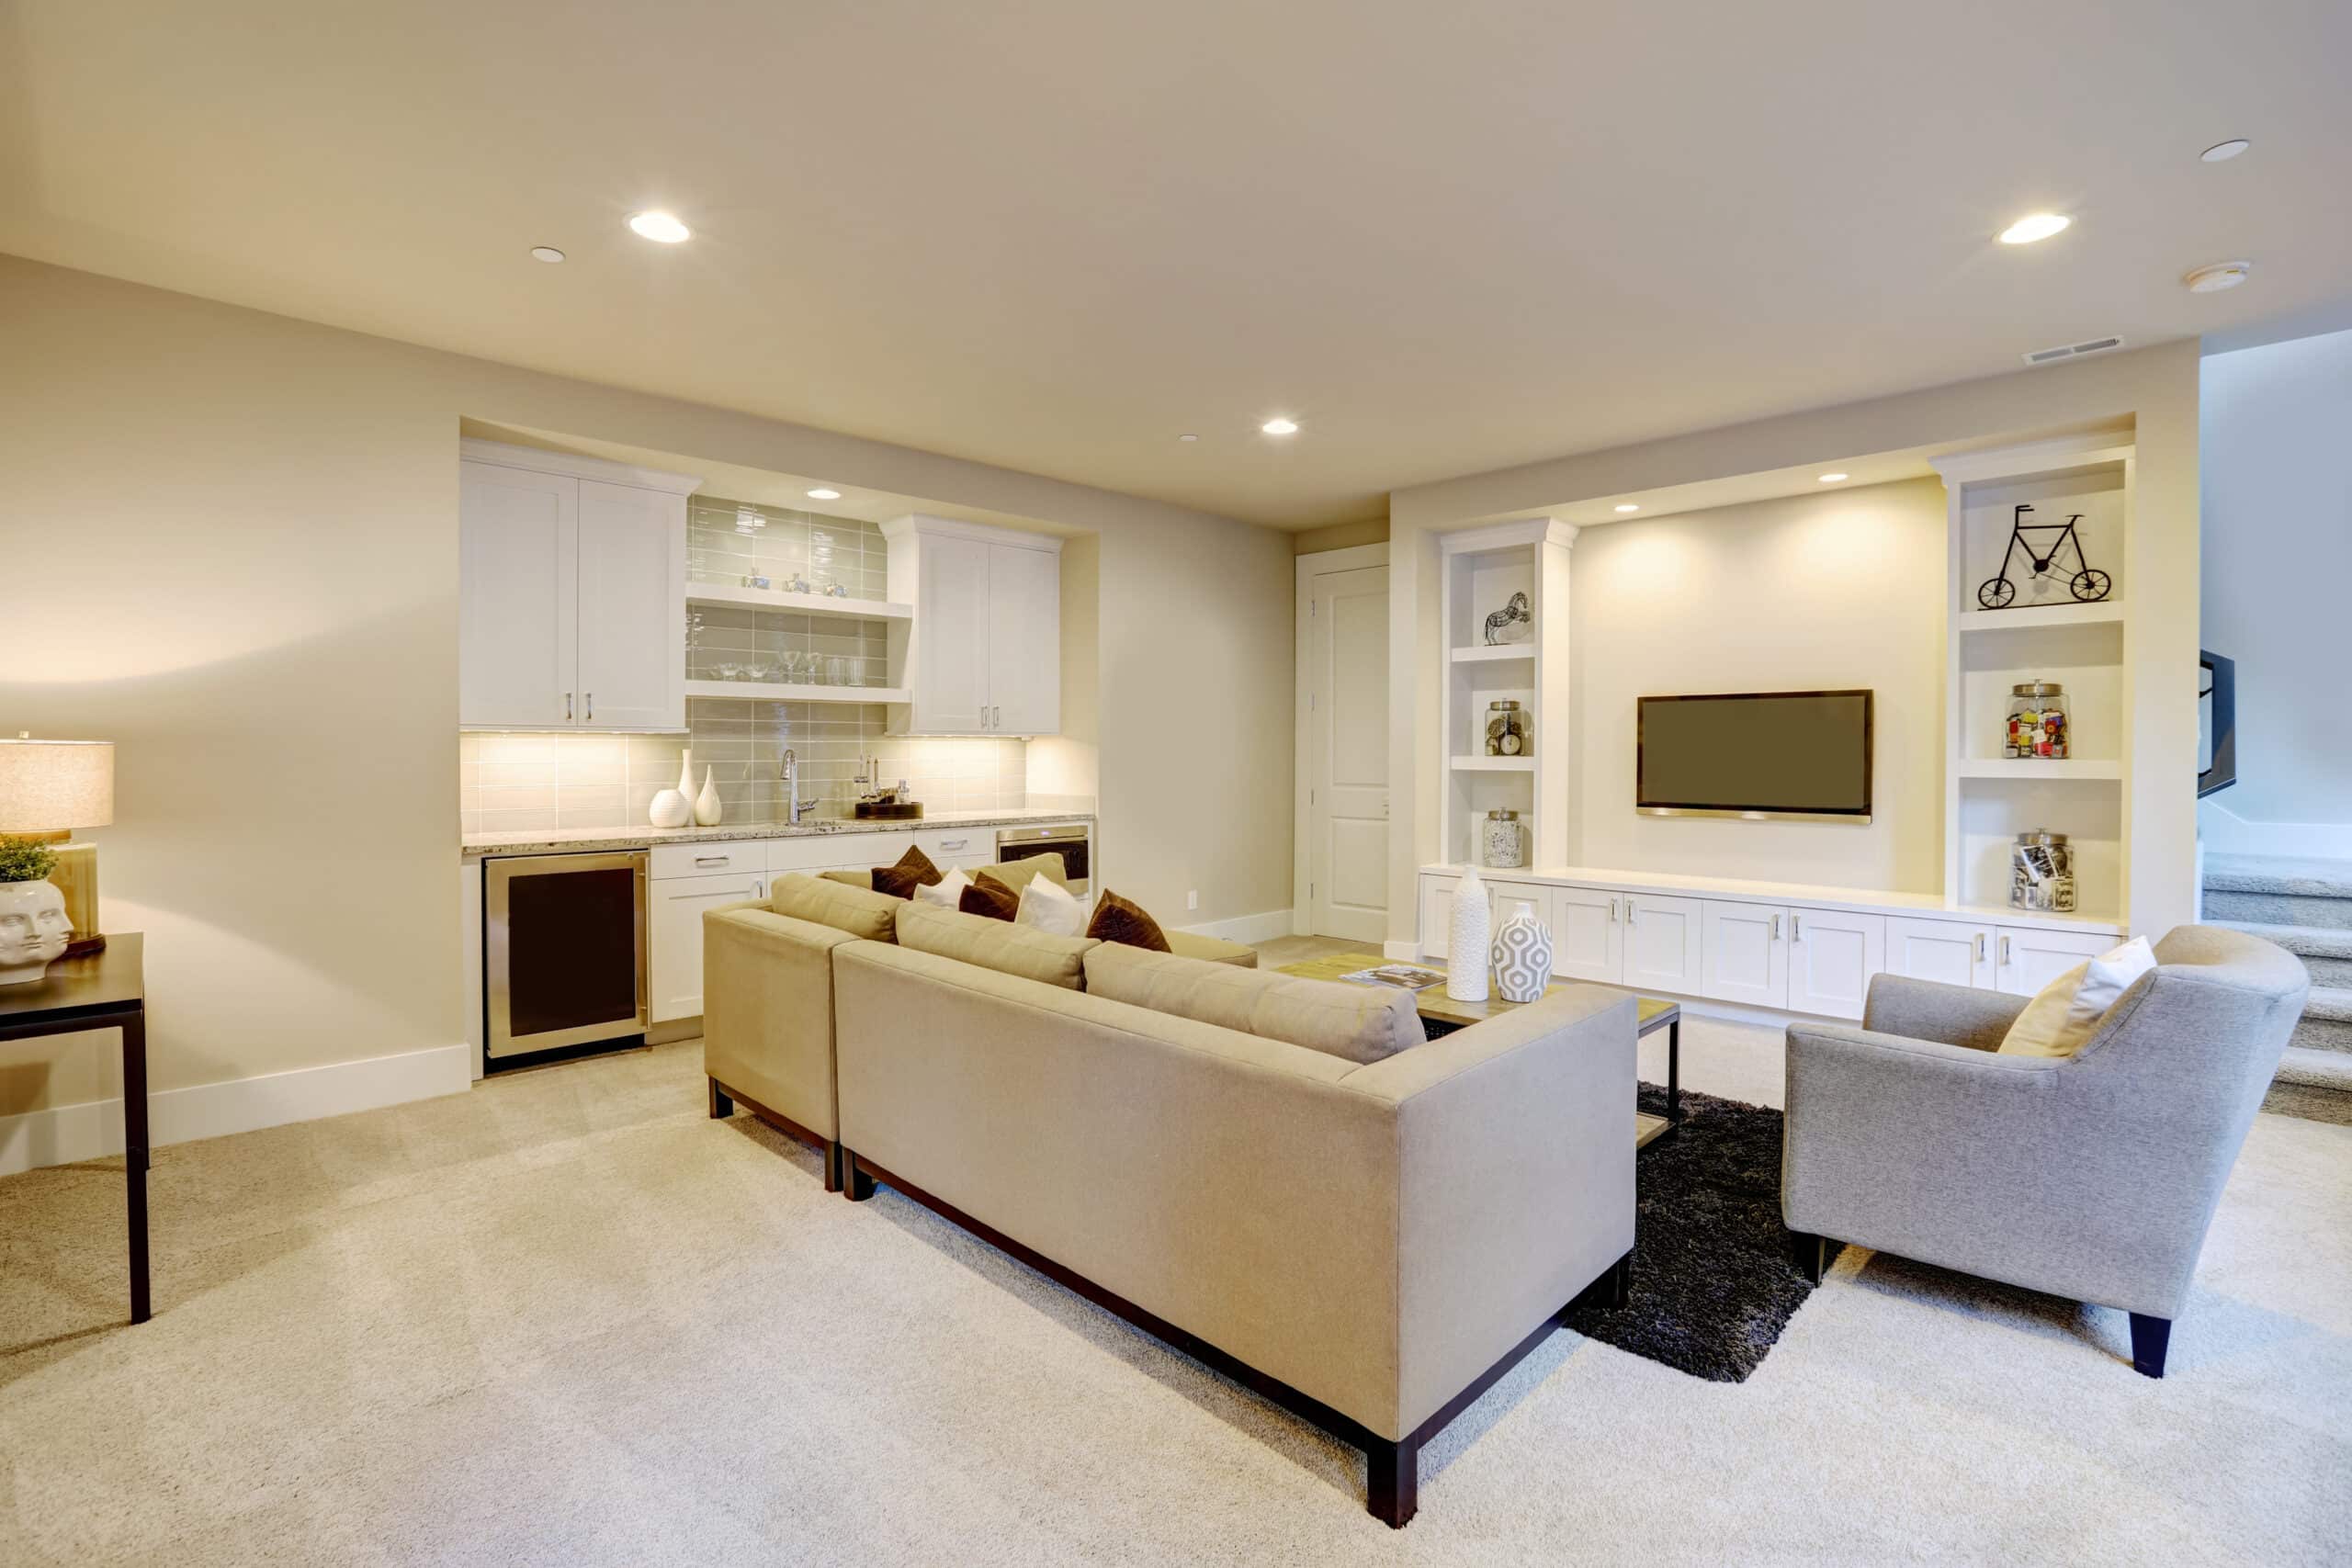 Chic basement features a gray sectional facing a white built-in tv cabinet and wet bar mounted to a wall.